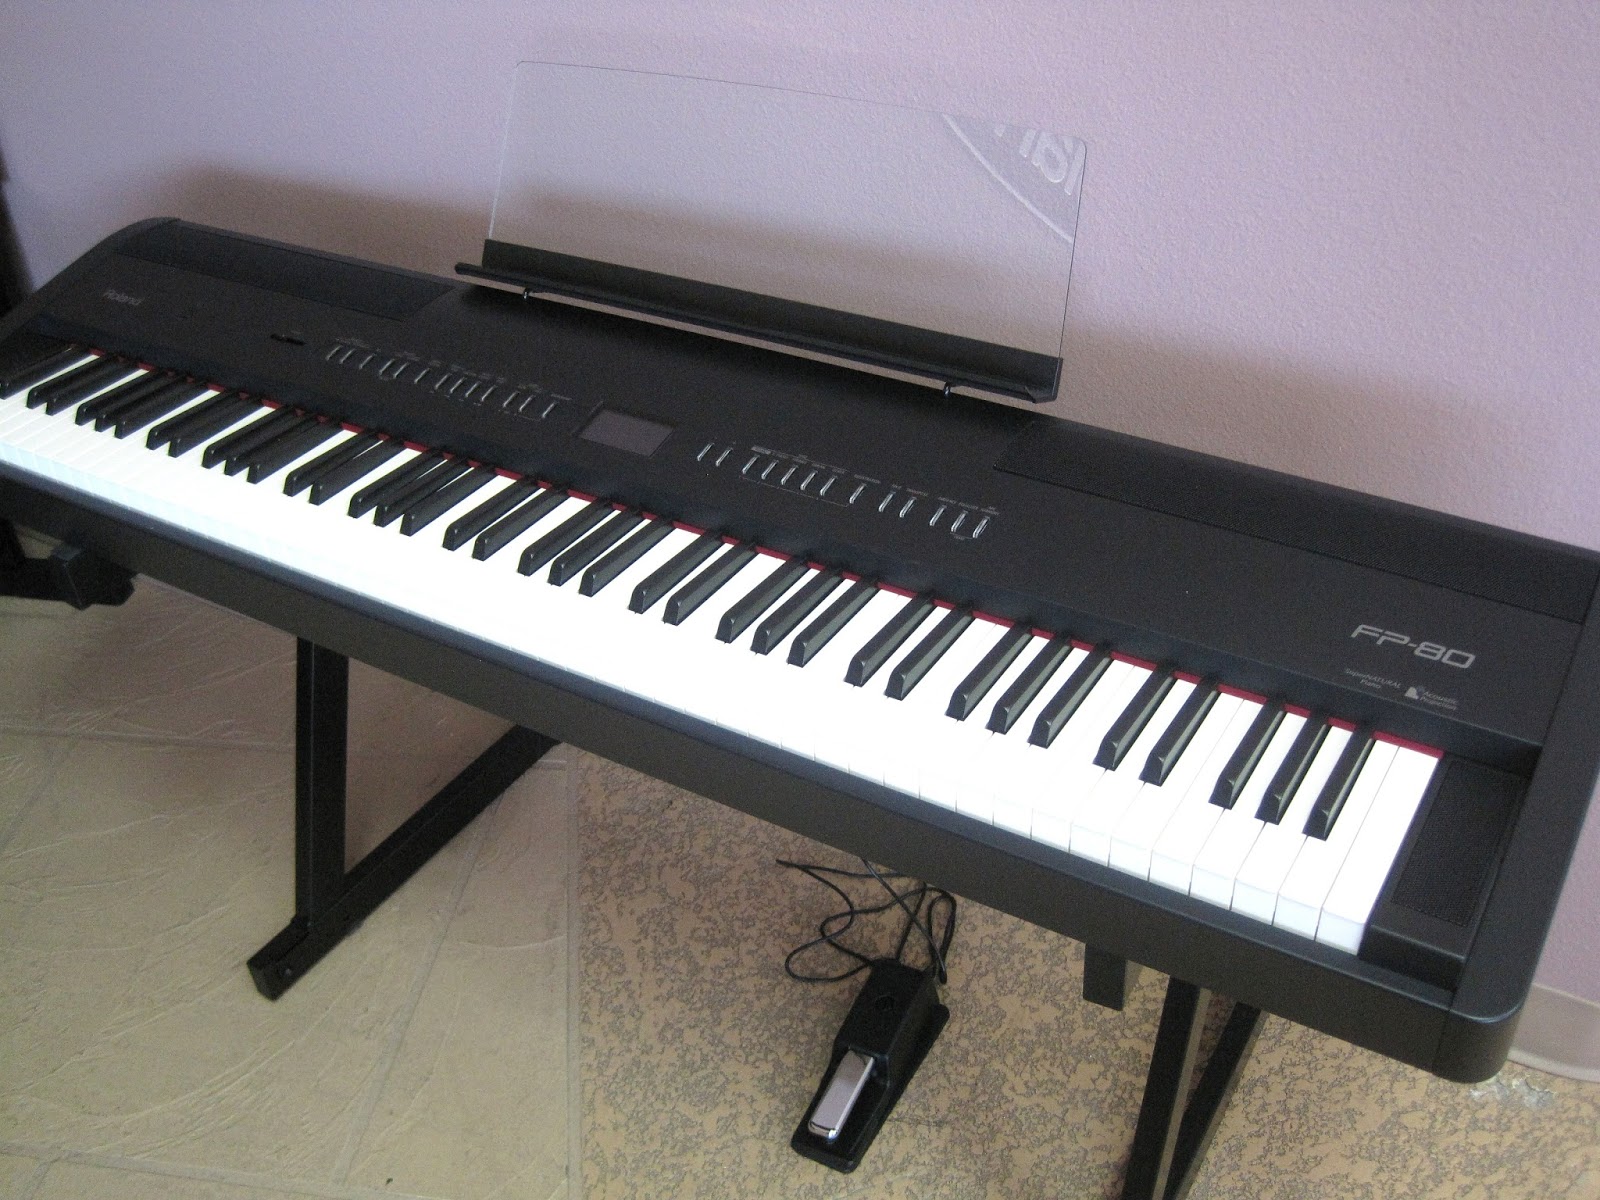 Tips for Purchasing Digital Pianos and Keyboards